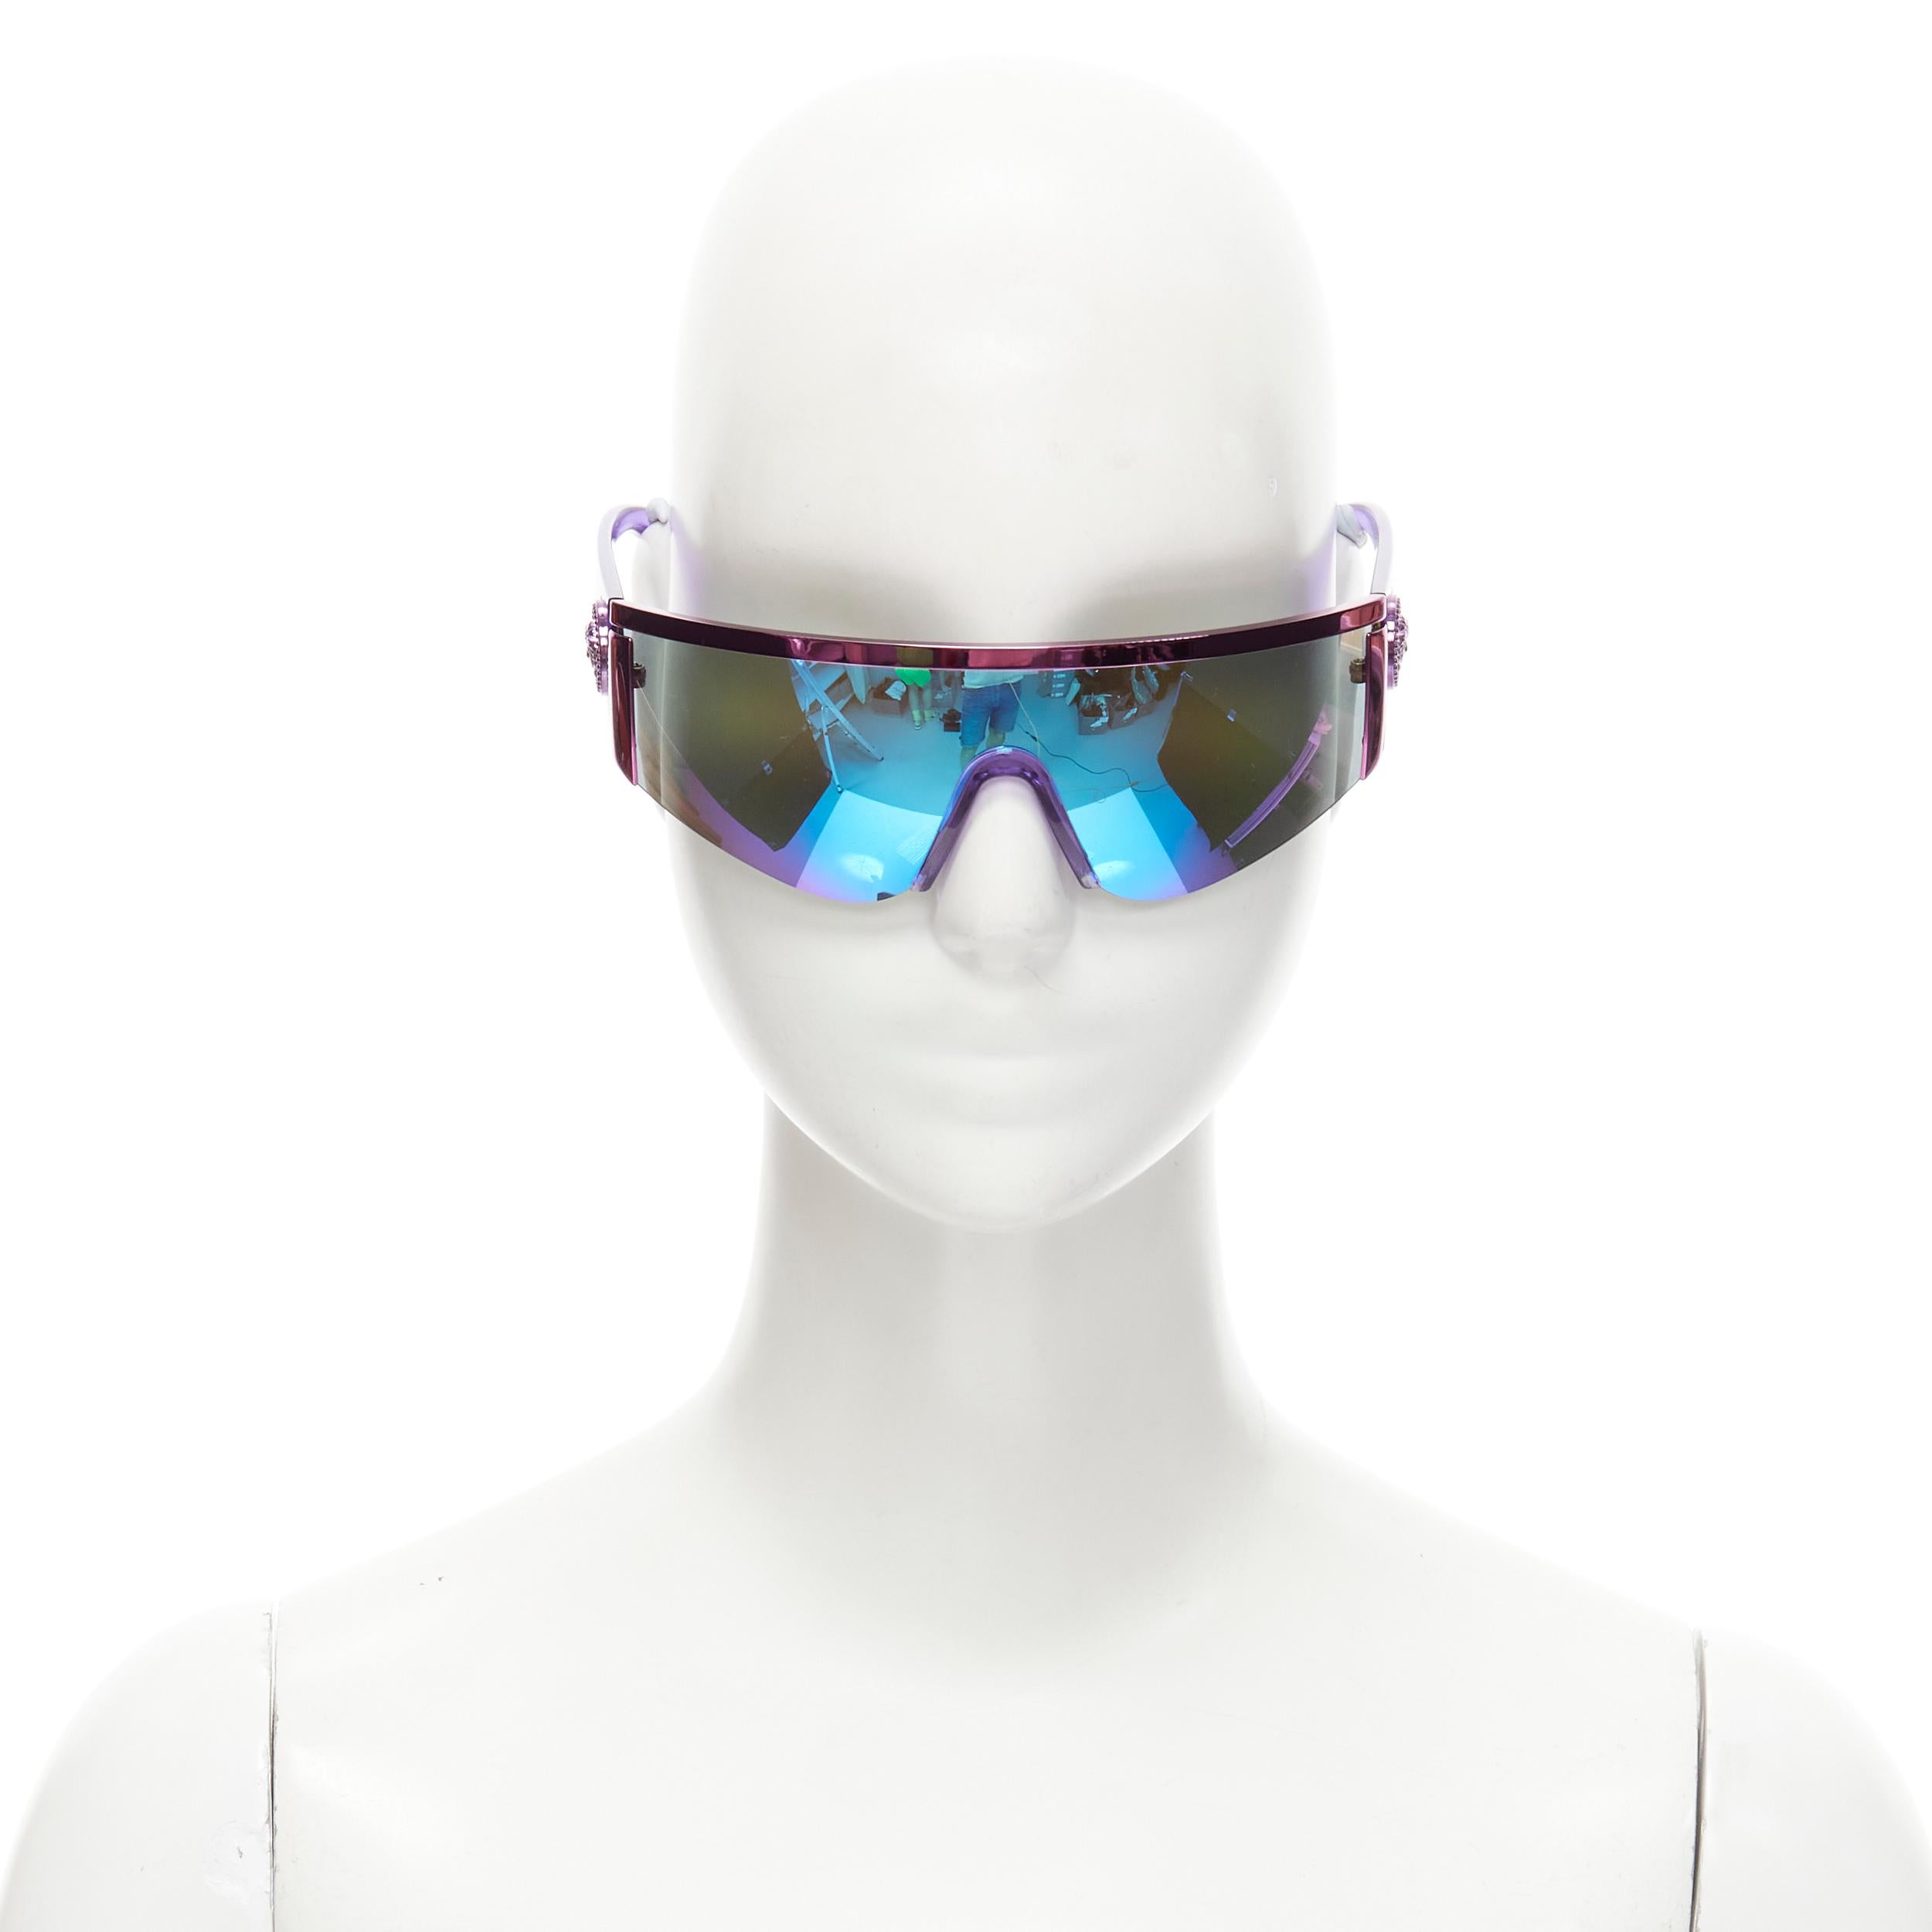 new VERSACE Tribute 2018 VE2197 Medusa purple blue mirrored shield sunglasses 
Reference: TGAS/C00184 
Brand: Versace 
Collection: Tribute 
Material: Metal 
Color: Purple 
Pattern: Solid 
Extra Detail: From the 2018 Tribute collection. Purple resin